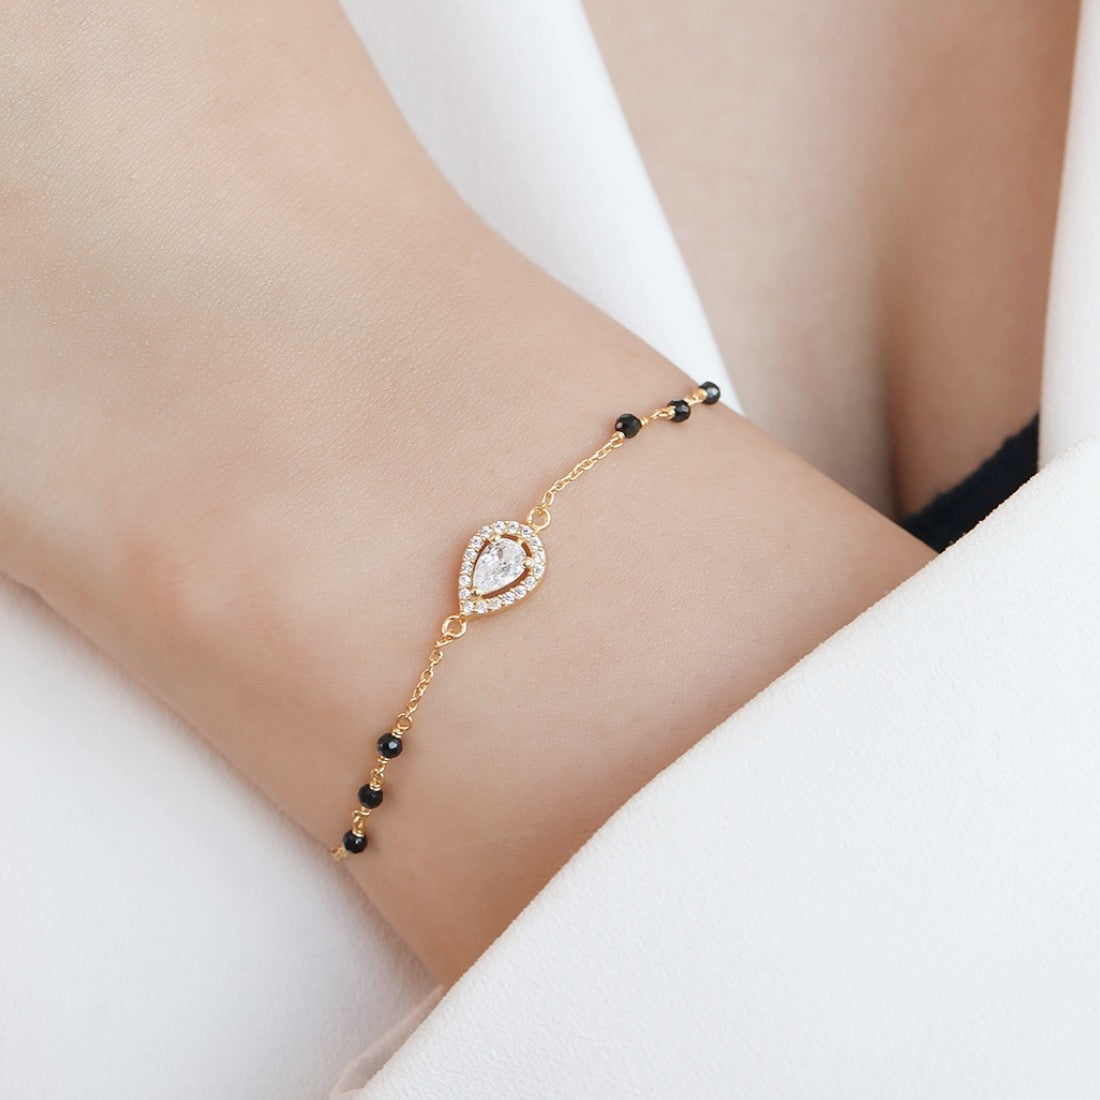 Golden Blush Gold-Plated 925 Sterling Silver Bracelet with Cubic Zirconia